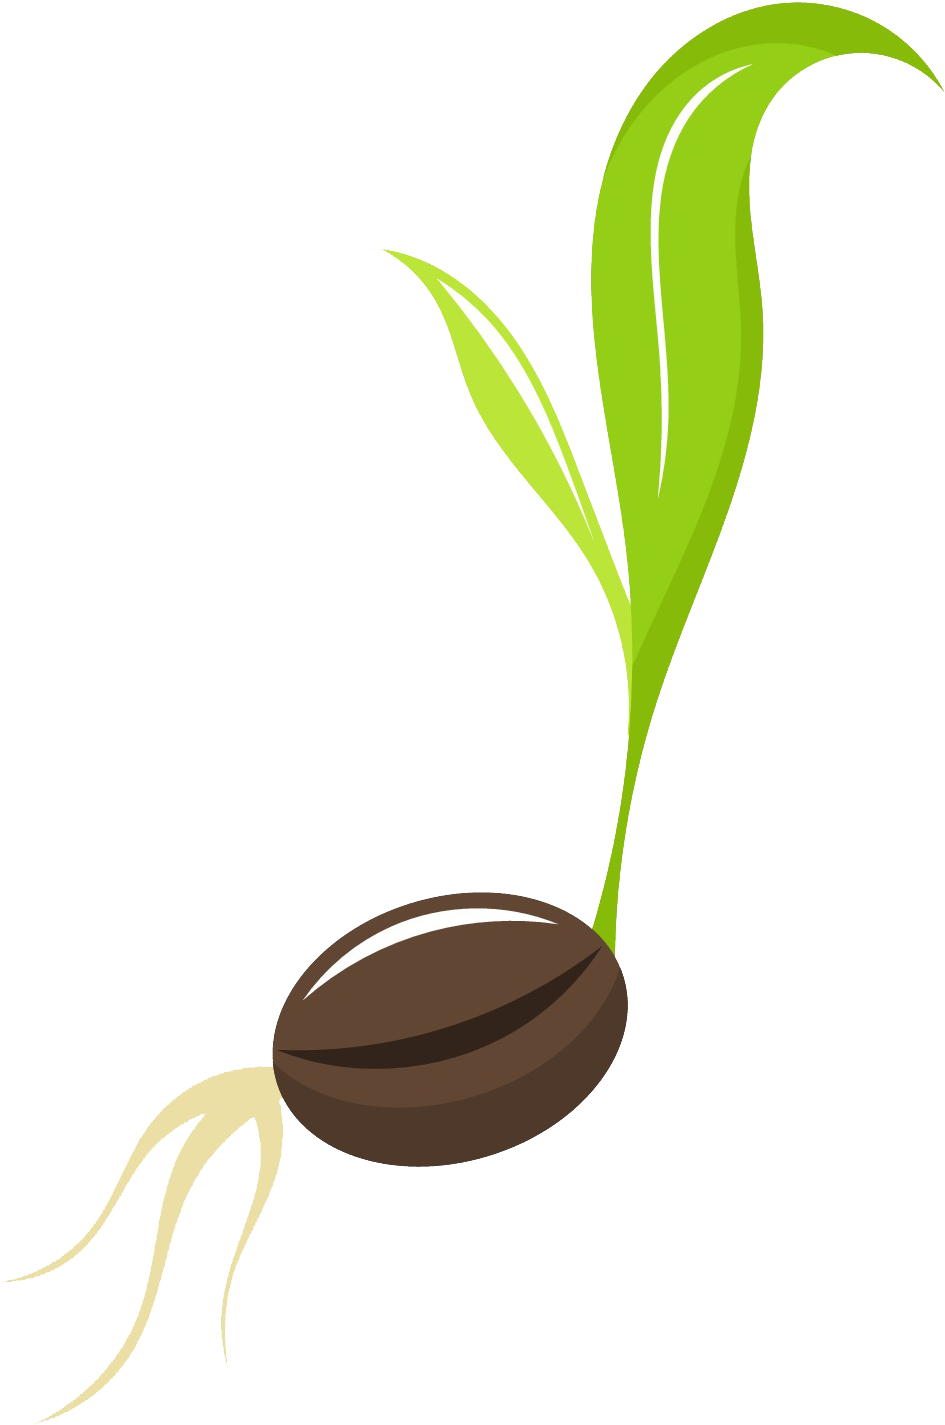 Seeds Clipart - Seed And Plant Clip Art (1344x1534)